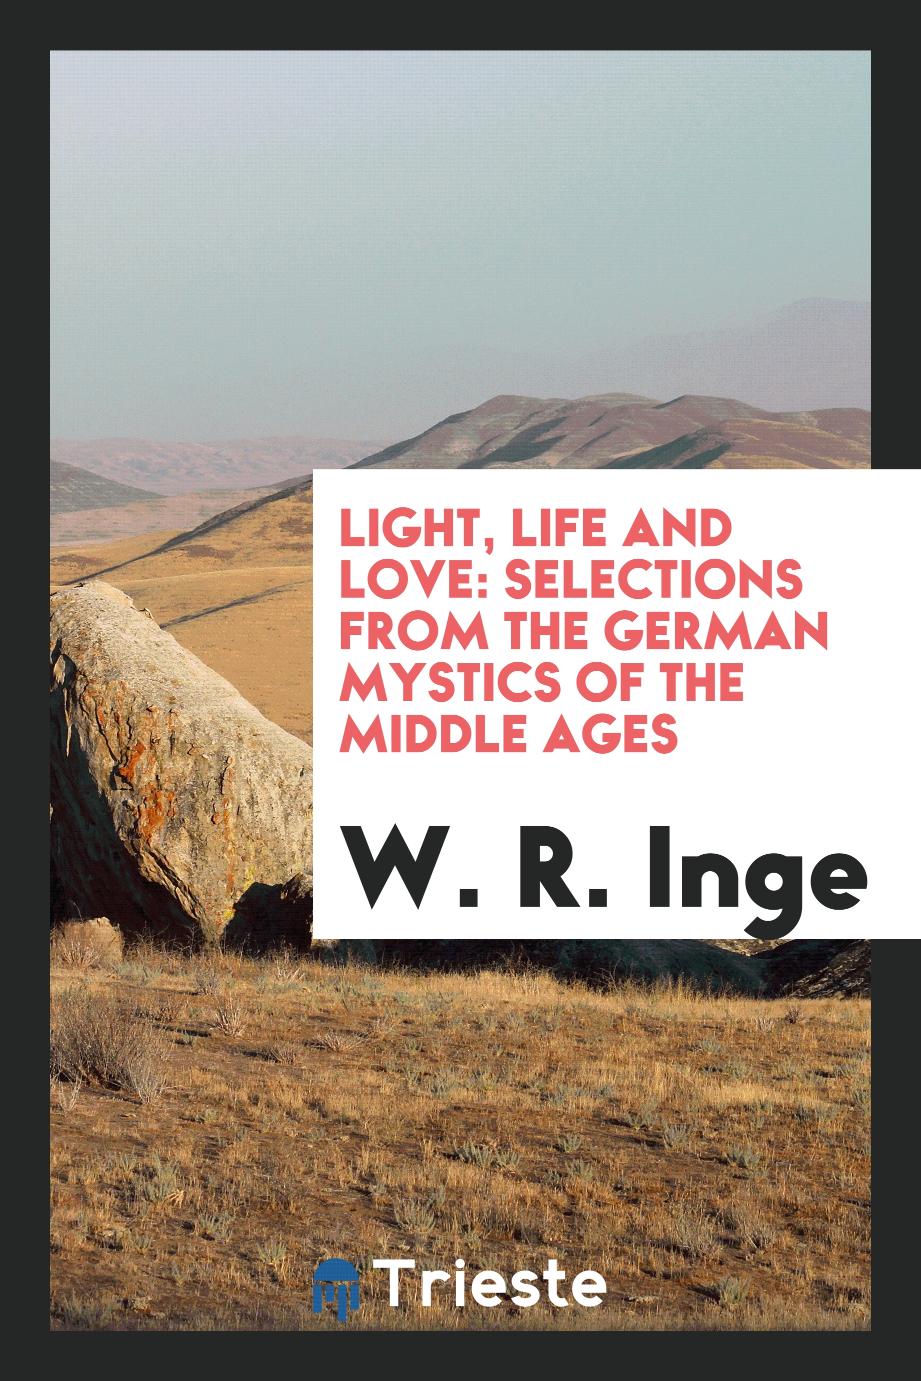 Light, Life and Love: Selections from the German Mystics of the Middle Ages